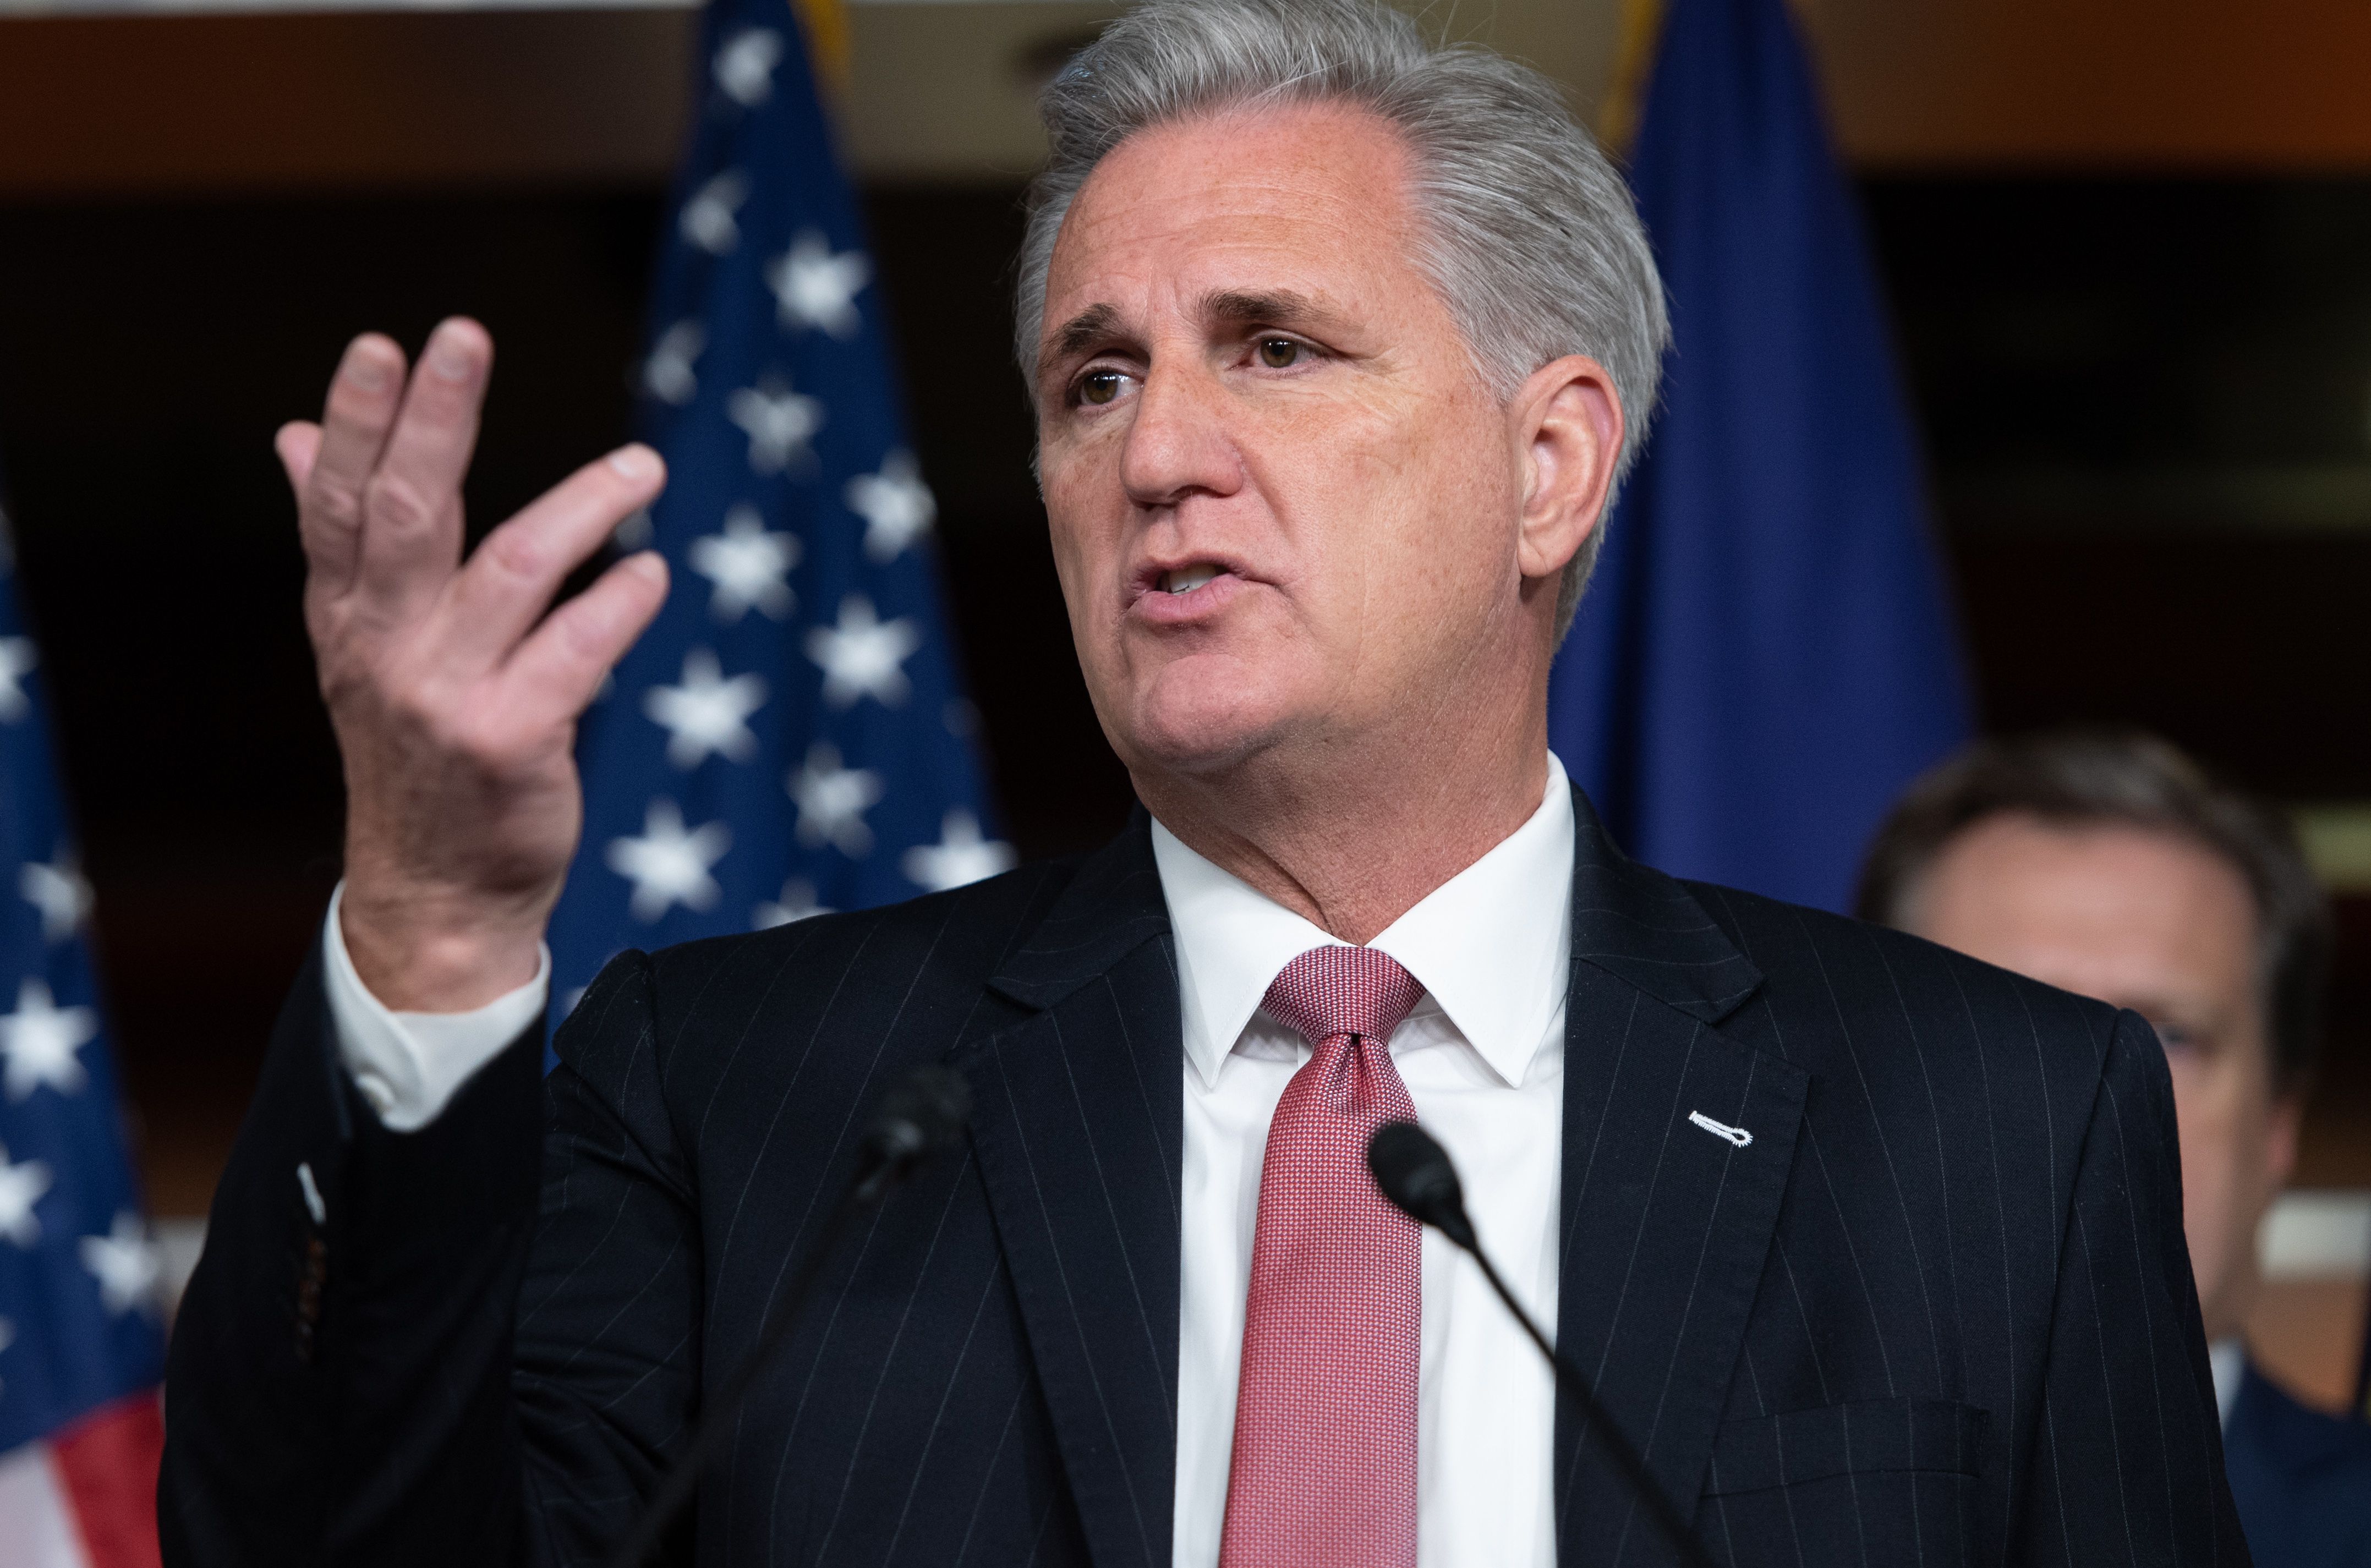 House Minority Leader Kevin McCarthy, a Republican from California, speaks during a news conference on Capitol Hill in Washington, DC, on Oct. 22, 2019. 